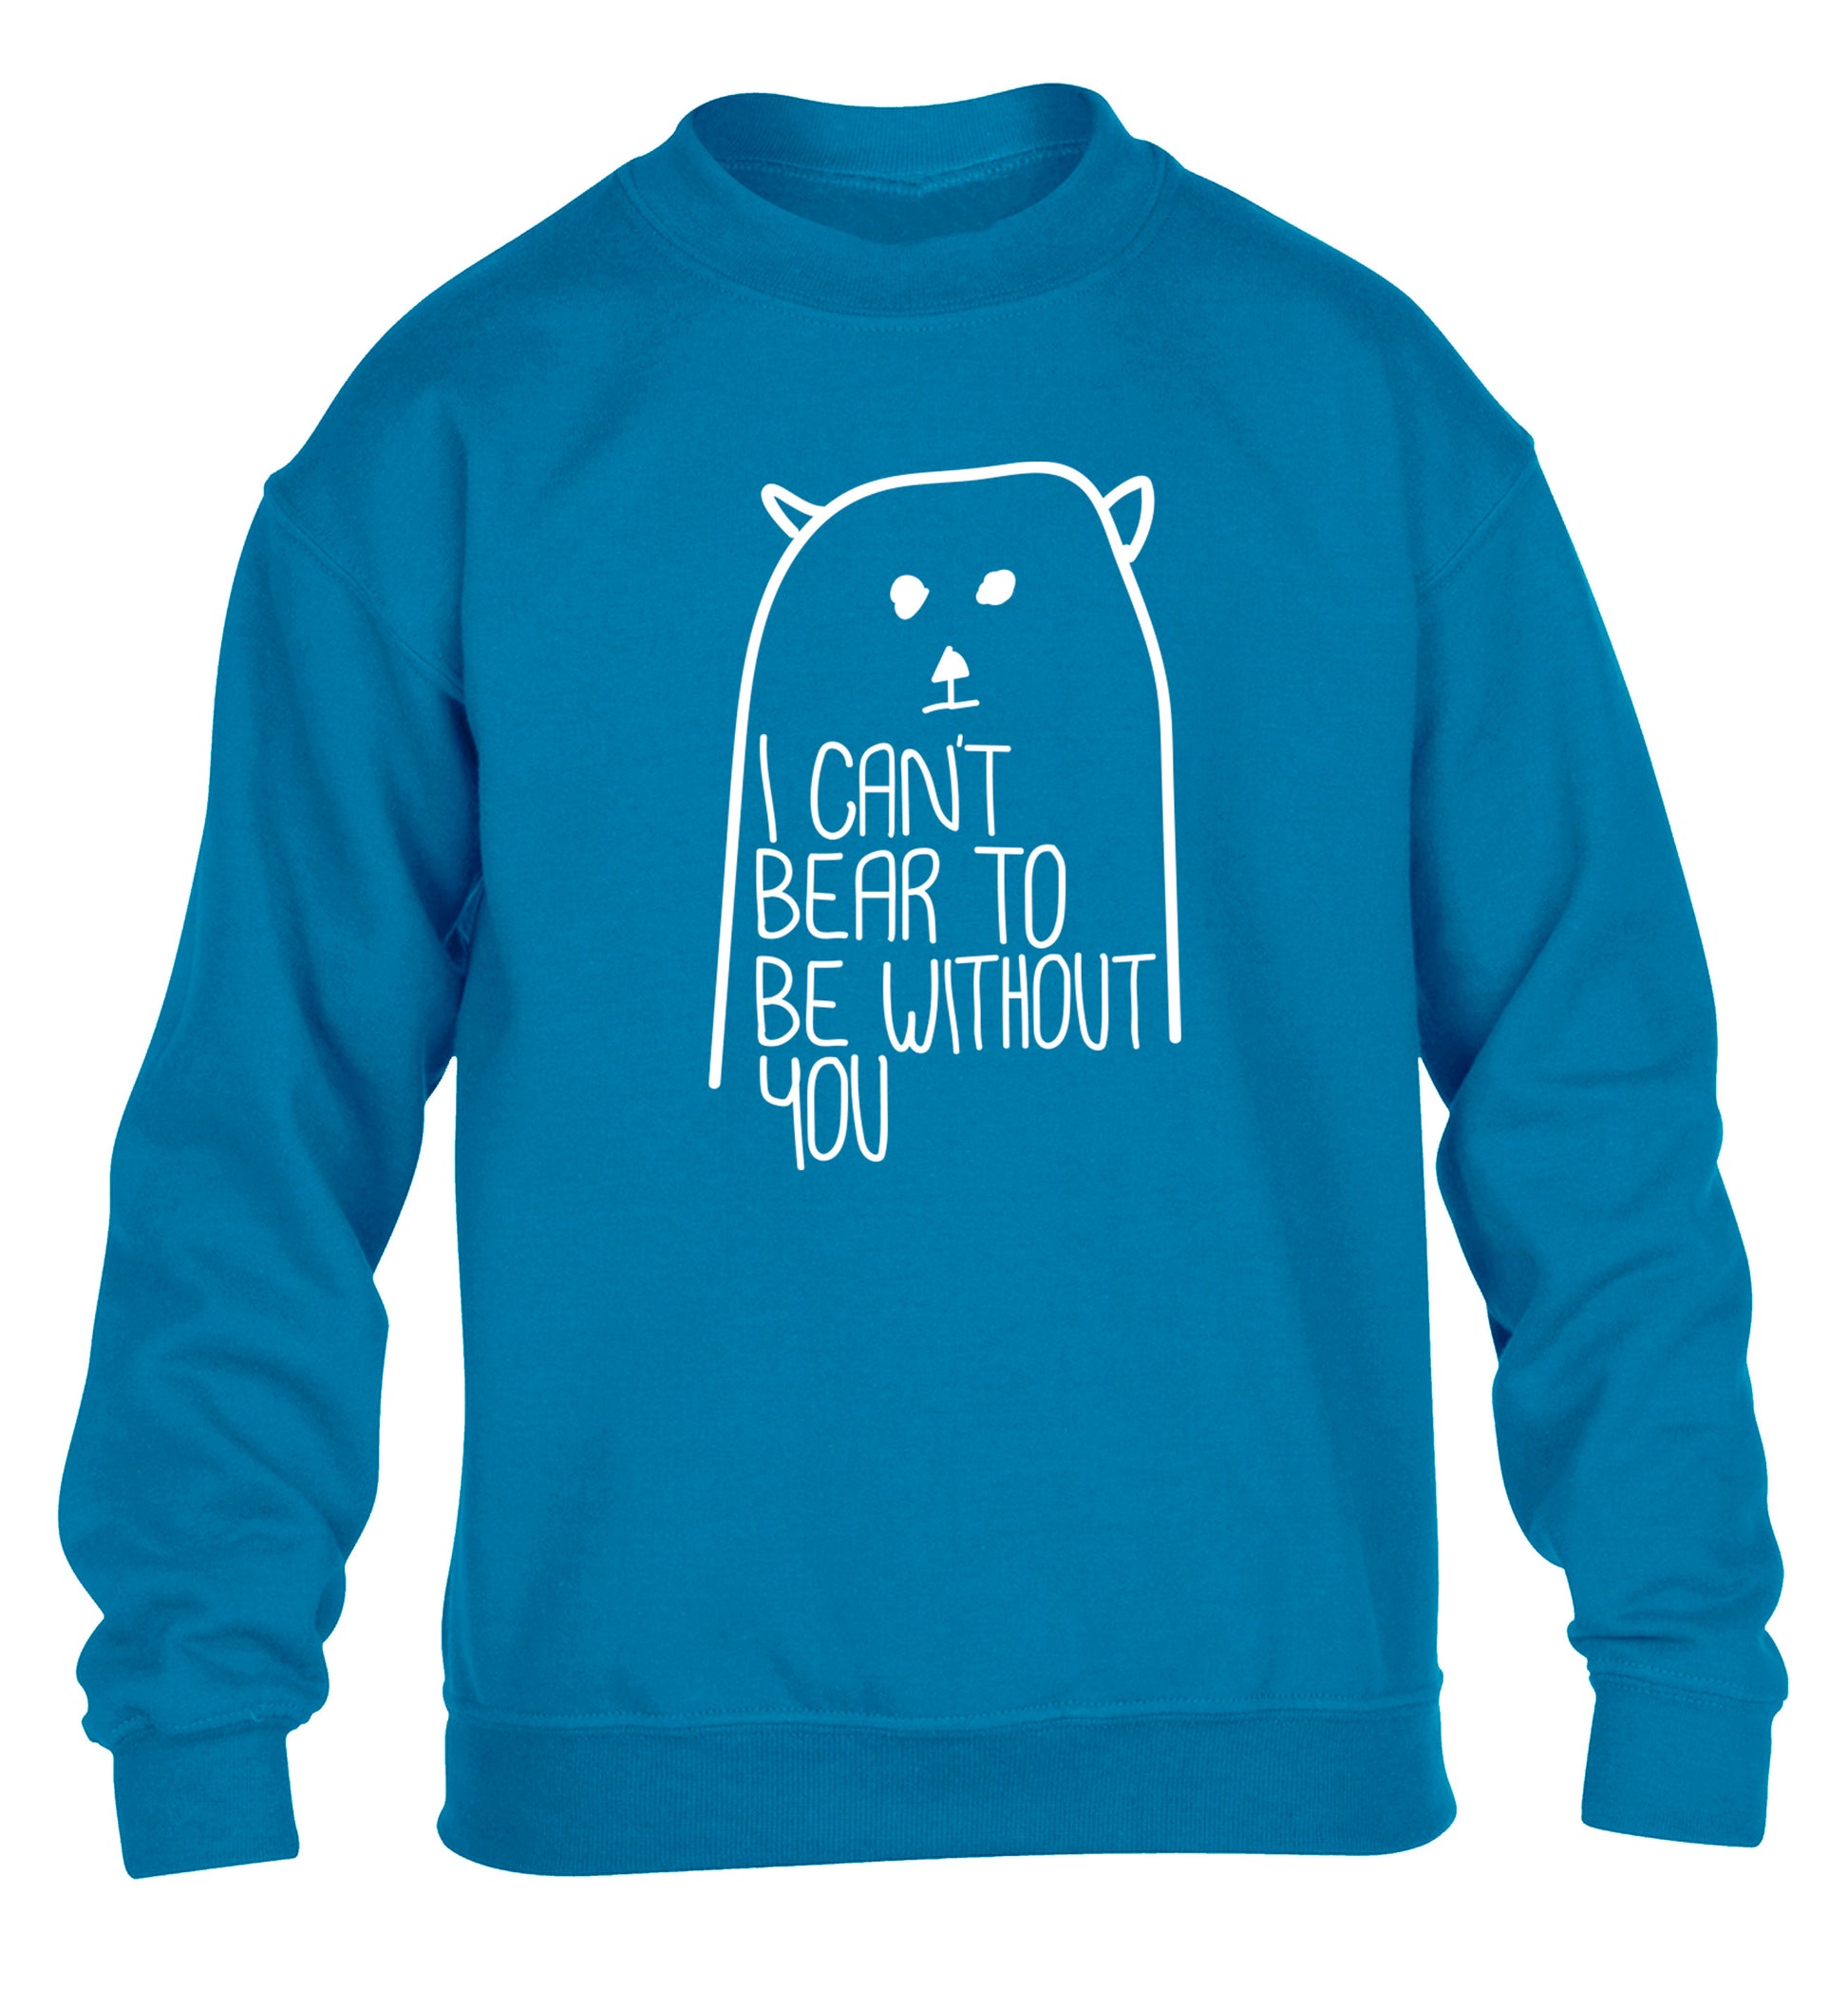 I can't bear to be without you children's blue sweater 12-13 Years